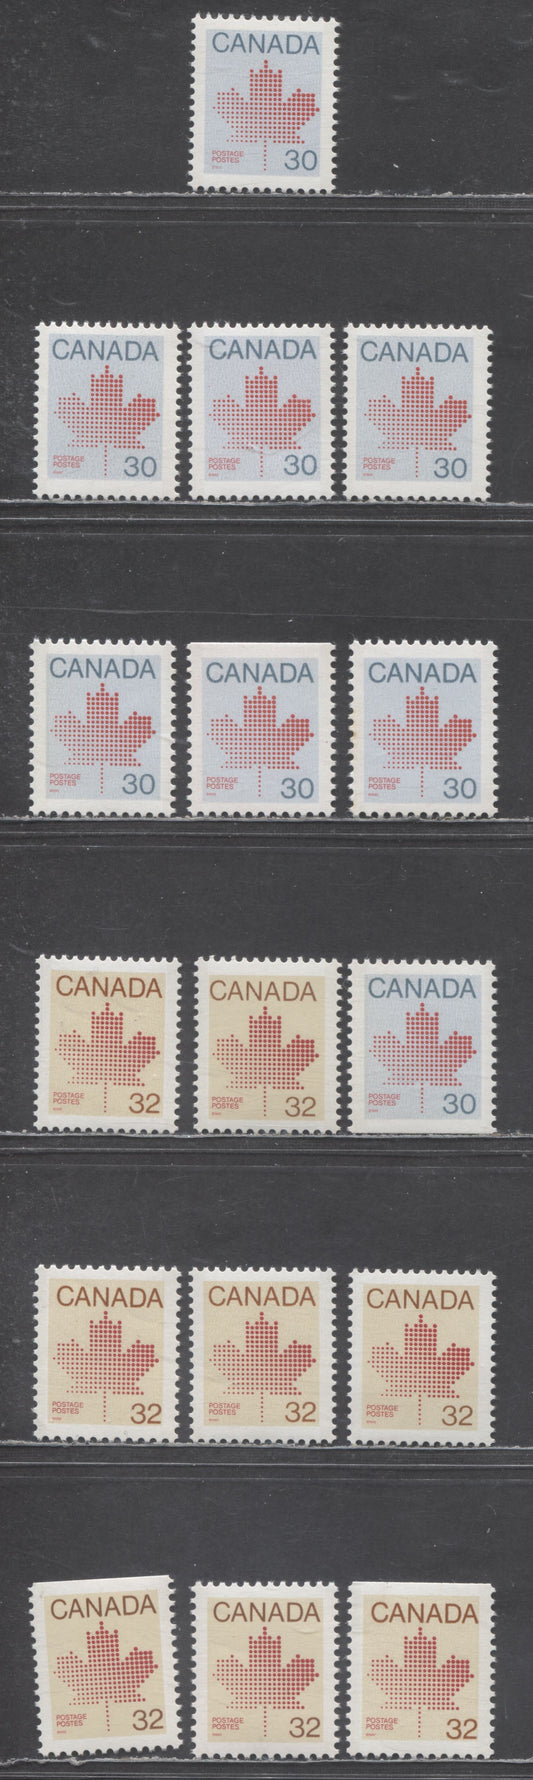 Lot 323 Canada #923,ii,b,bs, 924,iii,I,b,bs,bis,bisi 30c & 32c Red on Blue & Red on Cream Maple Leaf, 1982-1985 Definitives, 16 VFNH Sheet & Booklet Singles On Various Abitibi & Harrison Papers